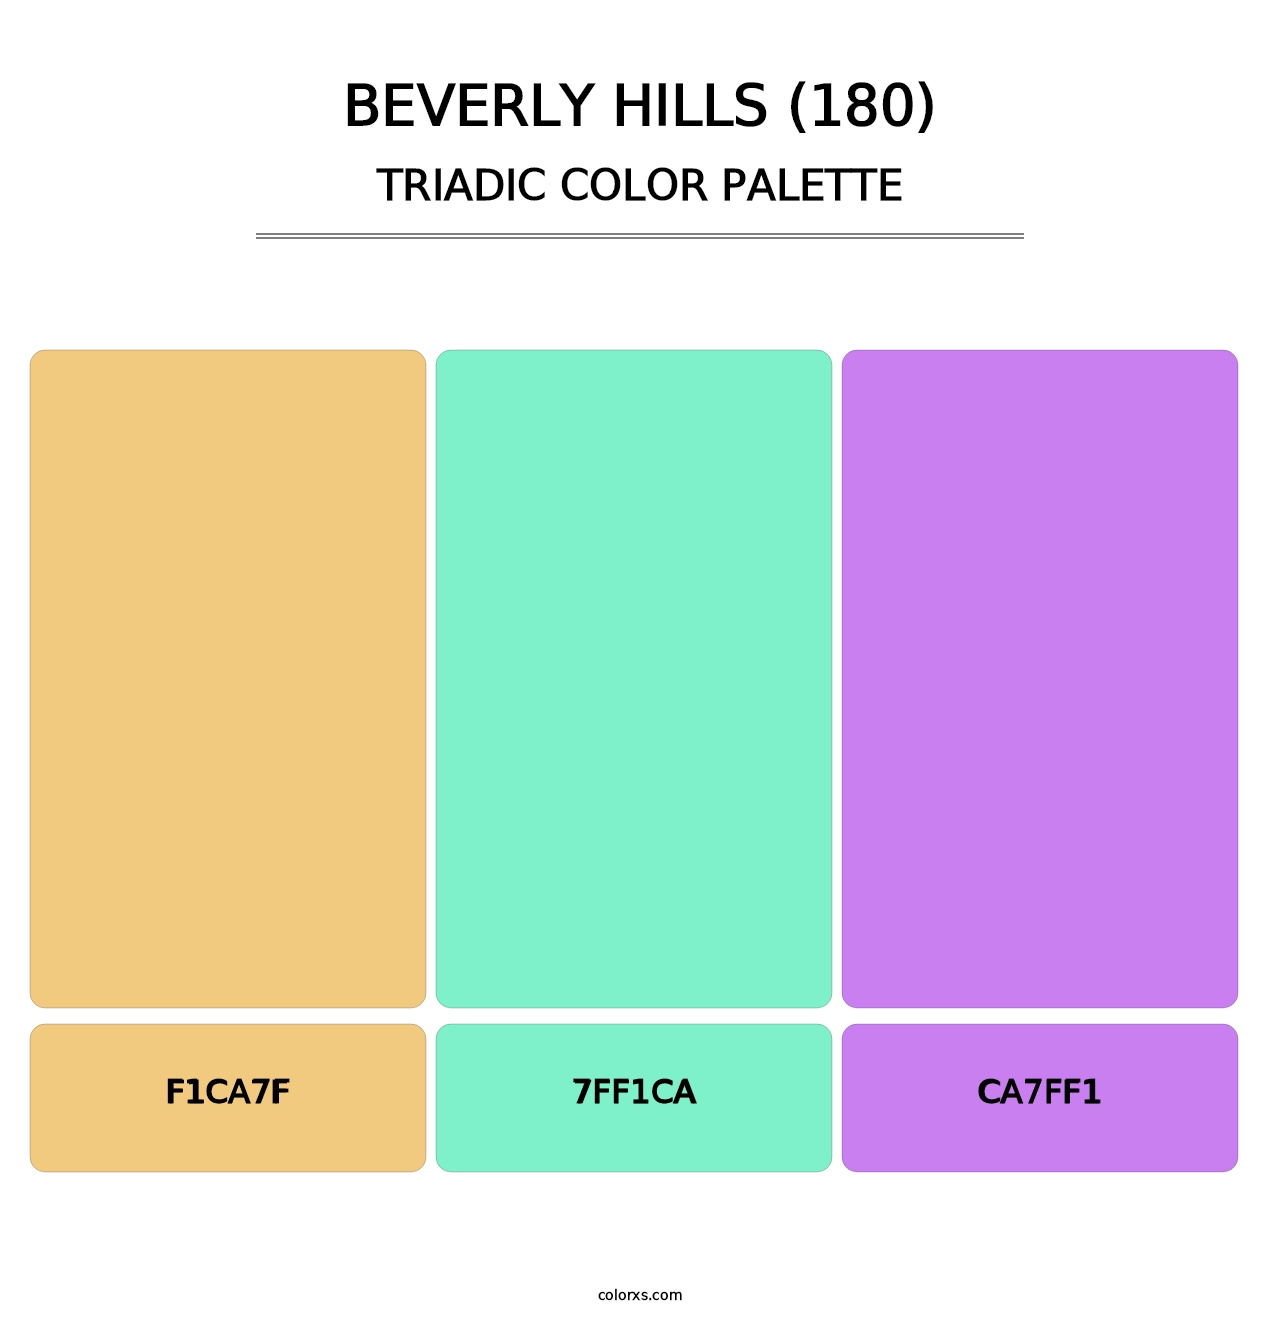 Beverly Hills (180) - Triadic Color Palette